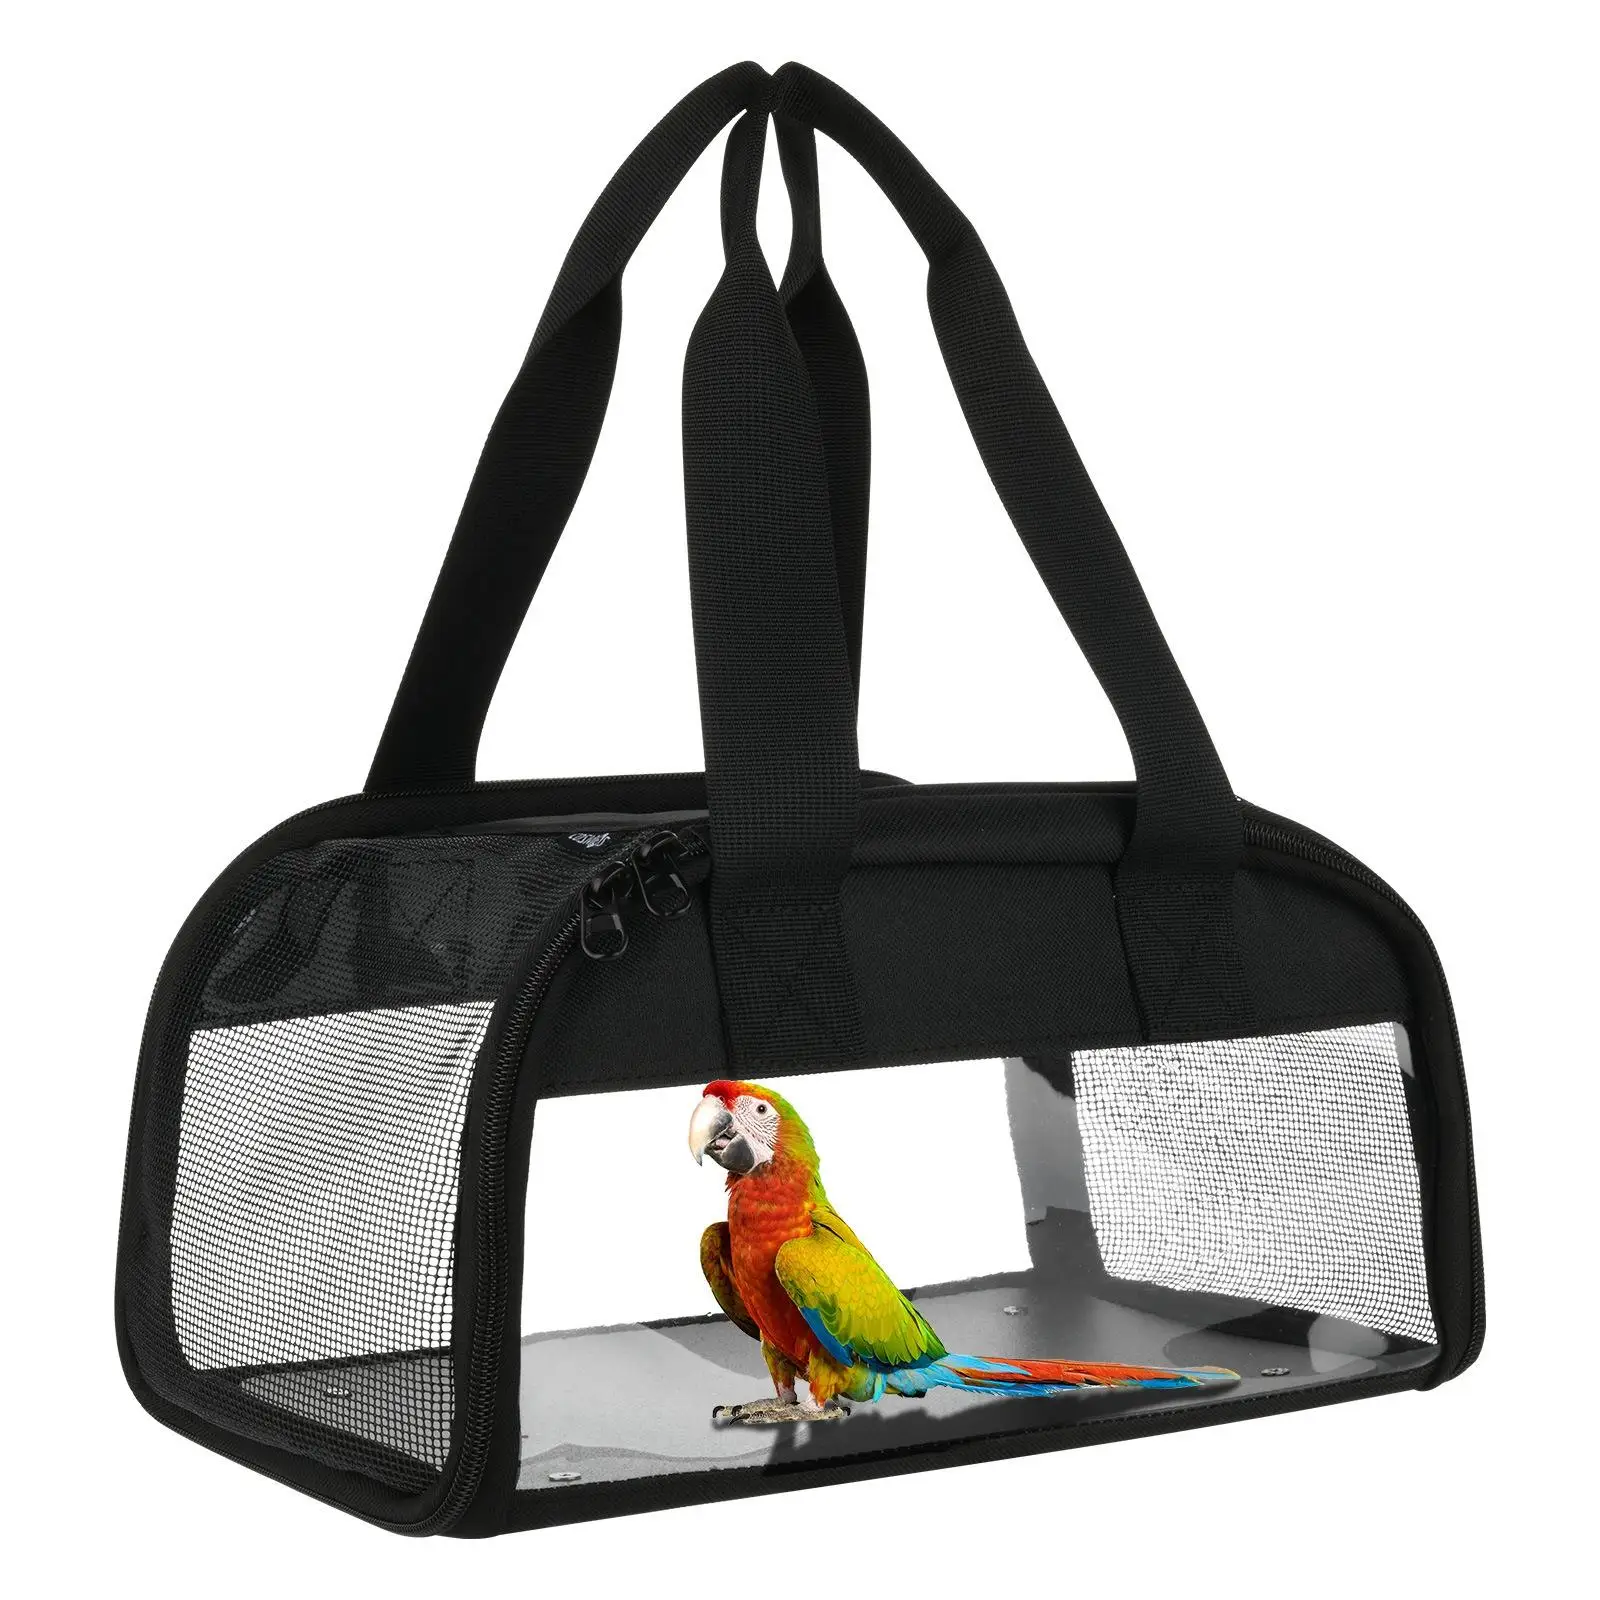 Bird Carrier Bag Tote Bag Portable Breathable Parrot Cockatiel Parakeet Carrying Case for Park Hiking Traveling Outdoor Walking